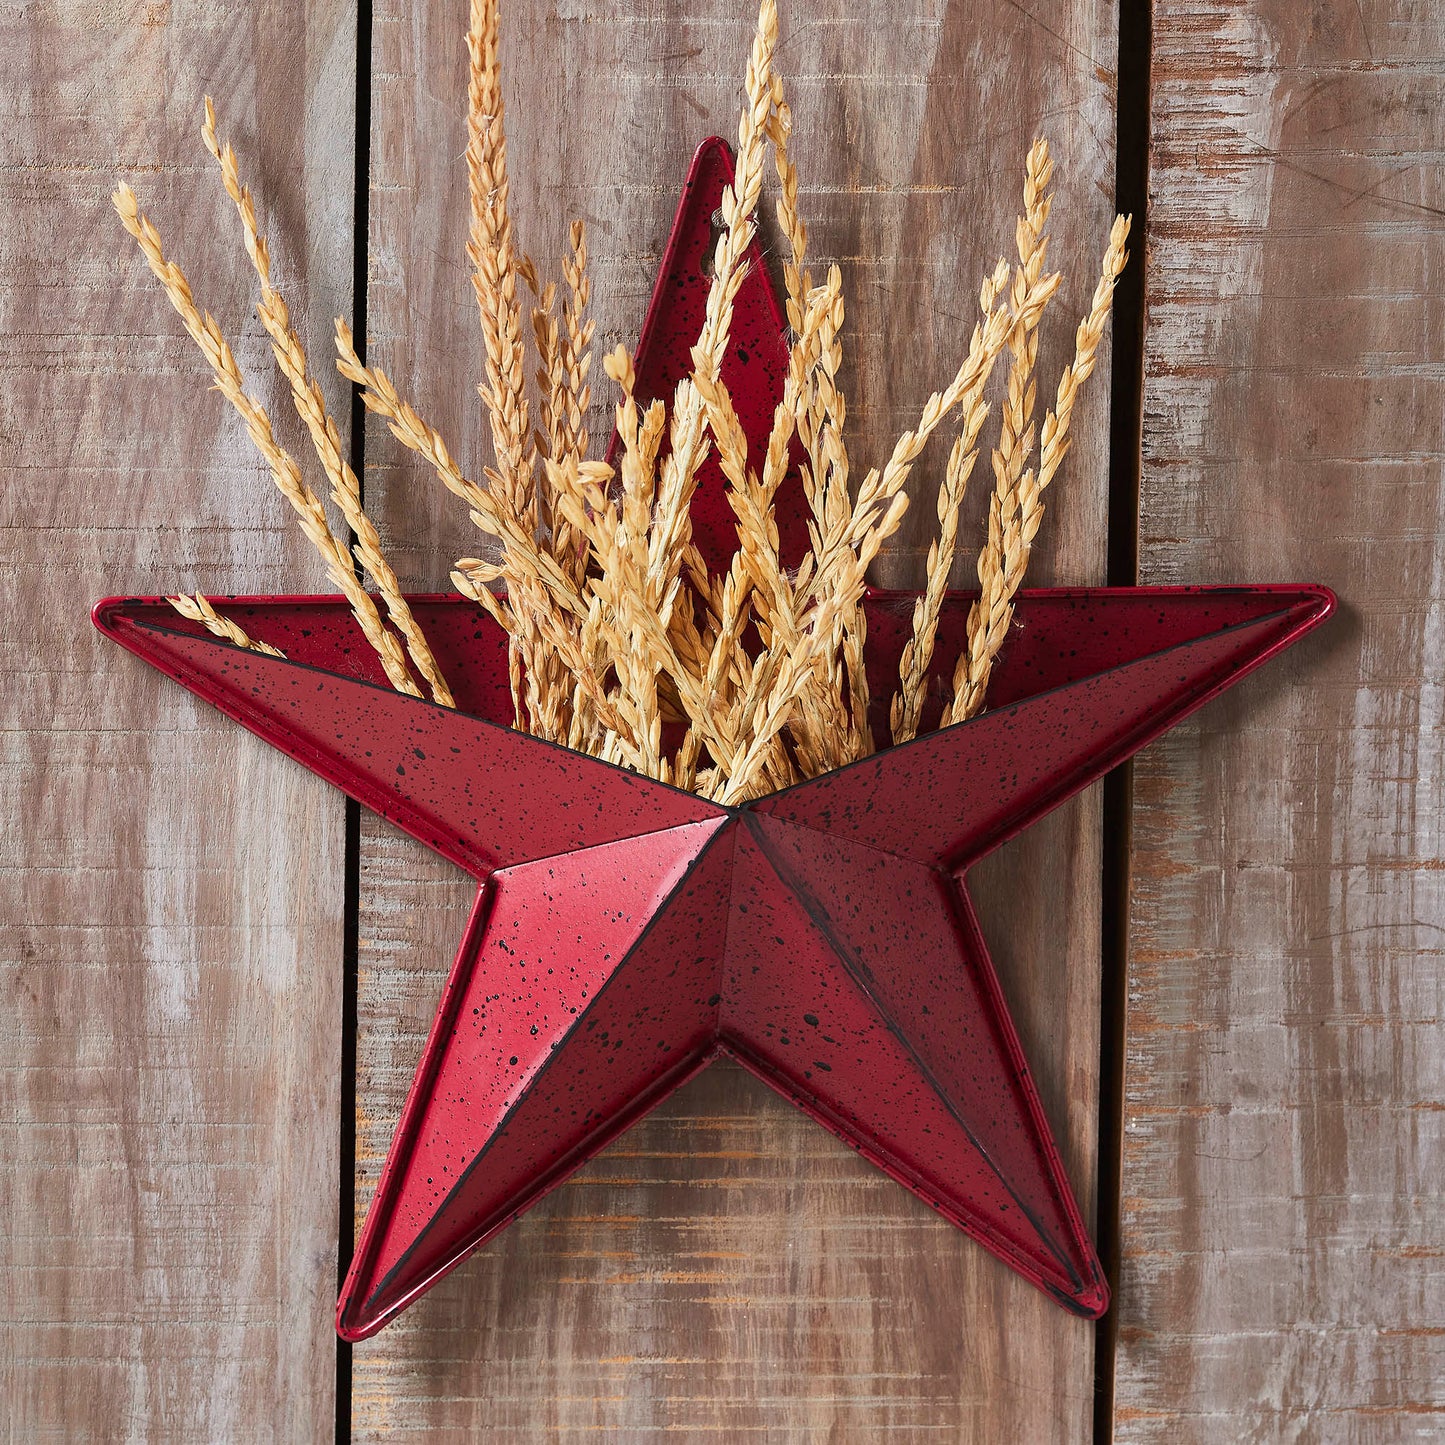 VHC Brands Patriotic Faceted Metal Star Burgundy Wall Hanging w/ Pocket 12x12, Independence Day Decor, American Star with display pocket, Distressed Appearance Wall Hanging,  Star Shape, Burgundy